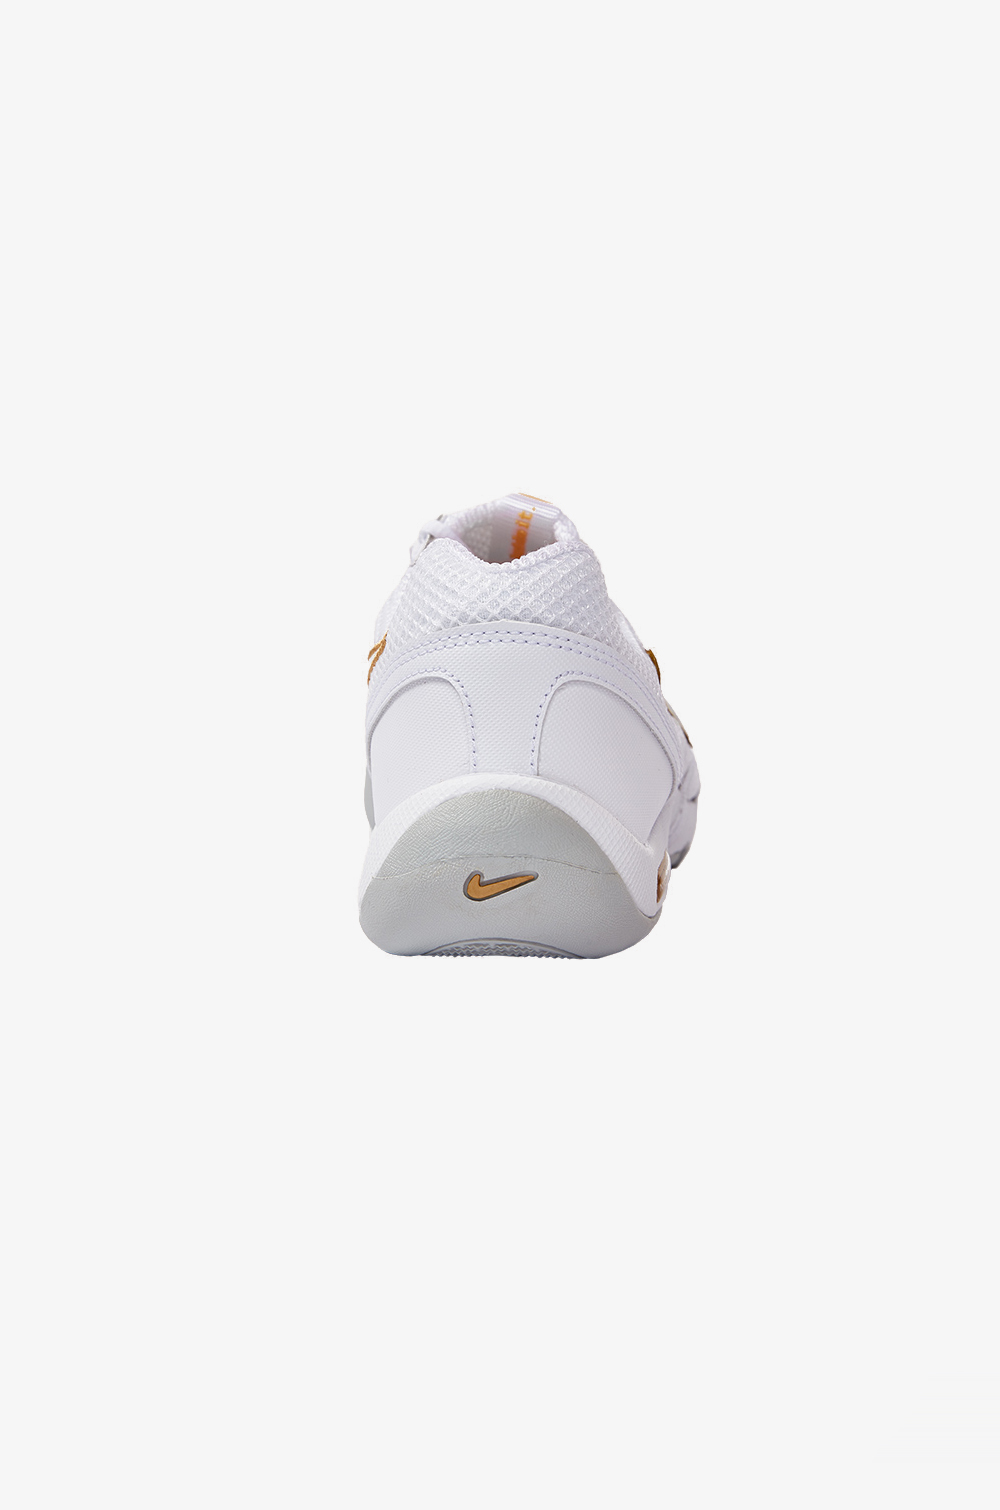 Nike Shoes Air Zoom Fencer Gold